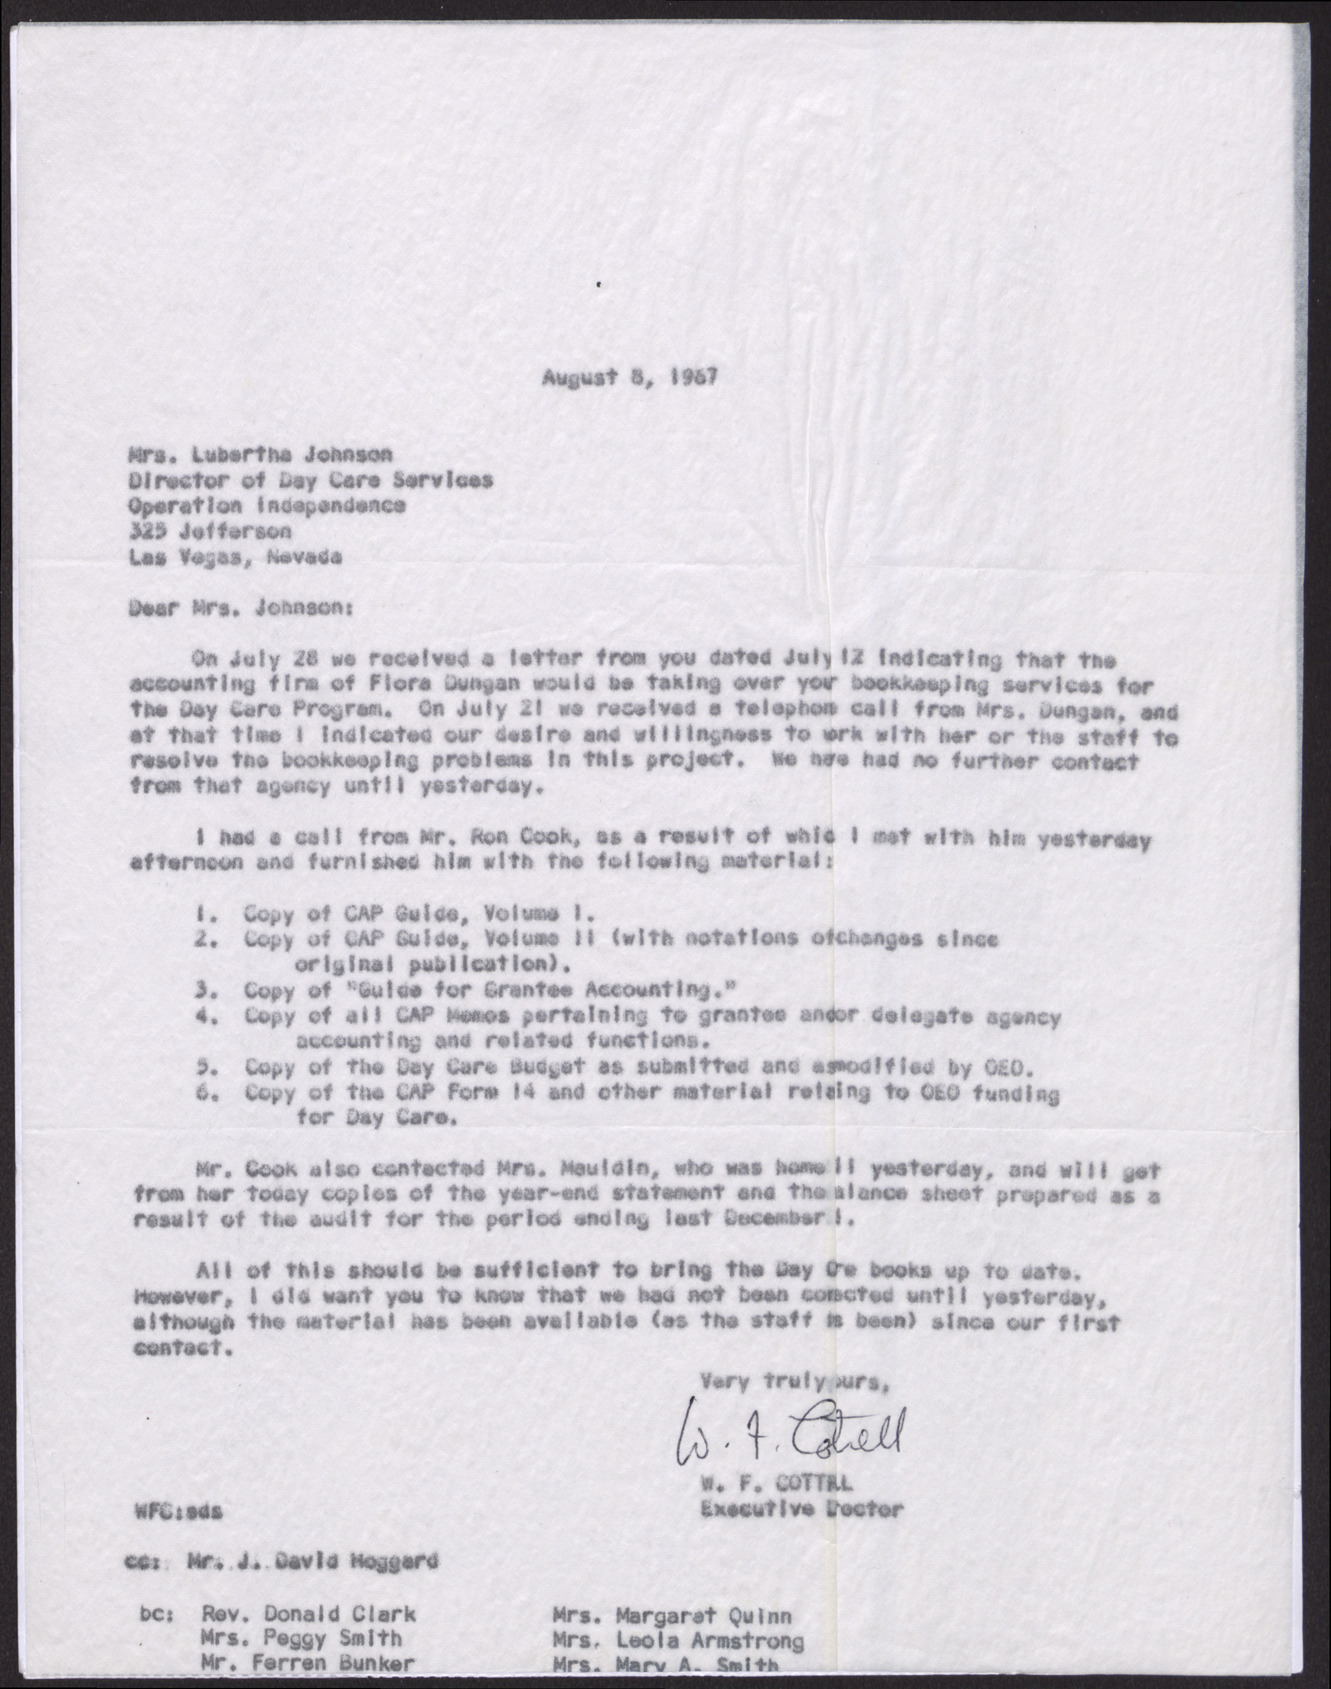 Letter to Mrs. Lubertha Johnson from W. F. Cottrell, August 8, 1967